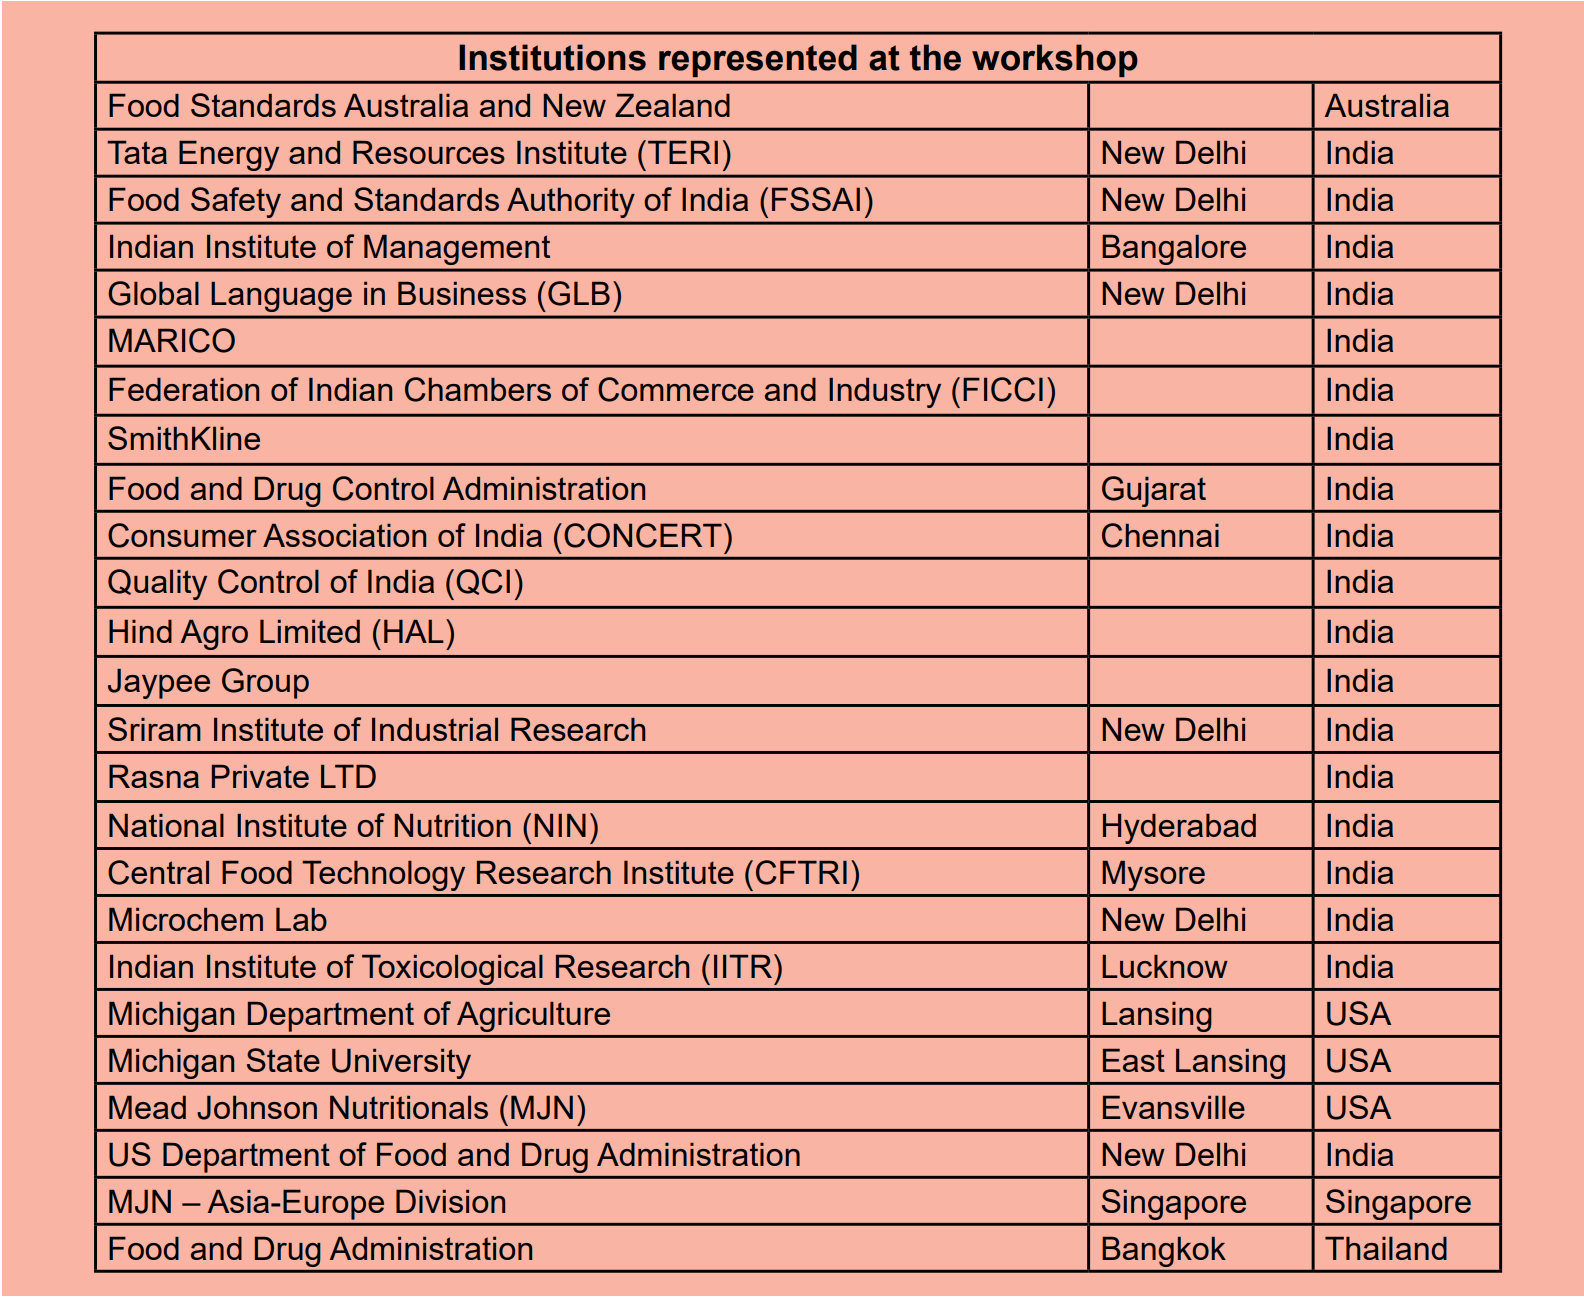 Institutions represented at the workshop